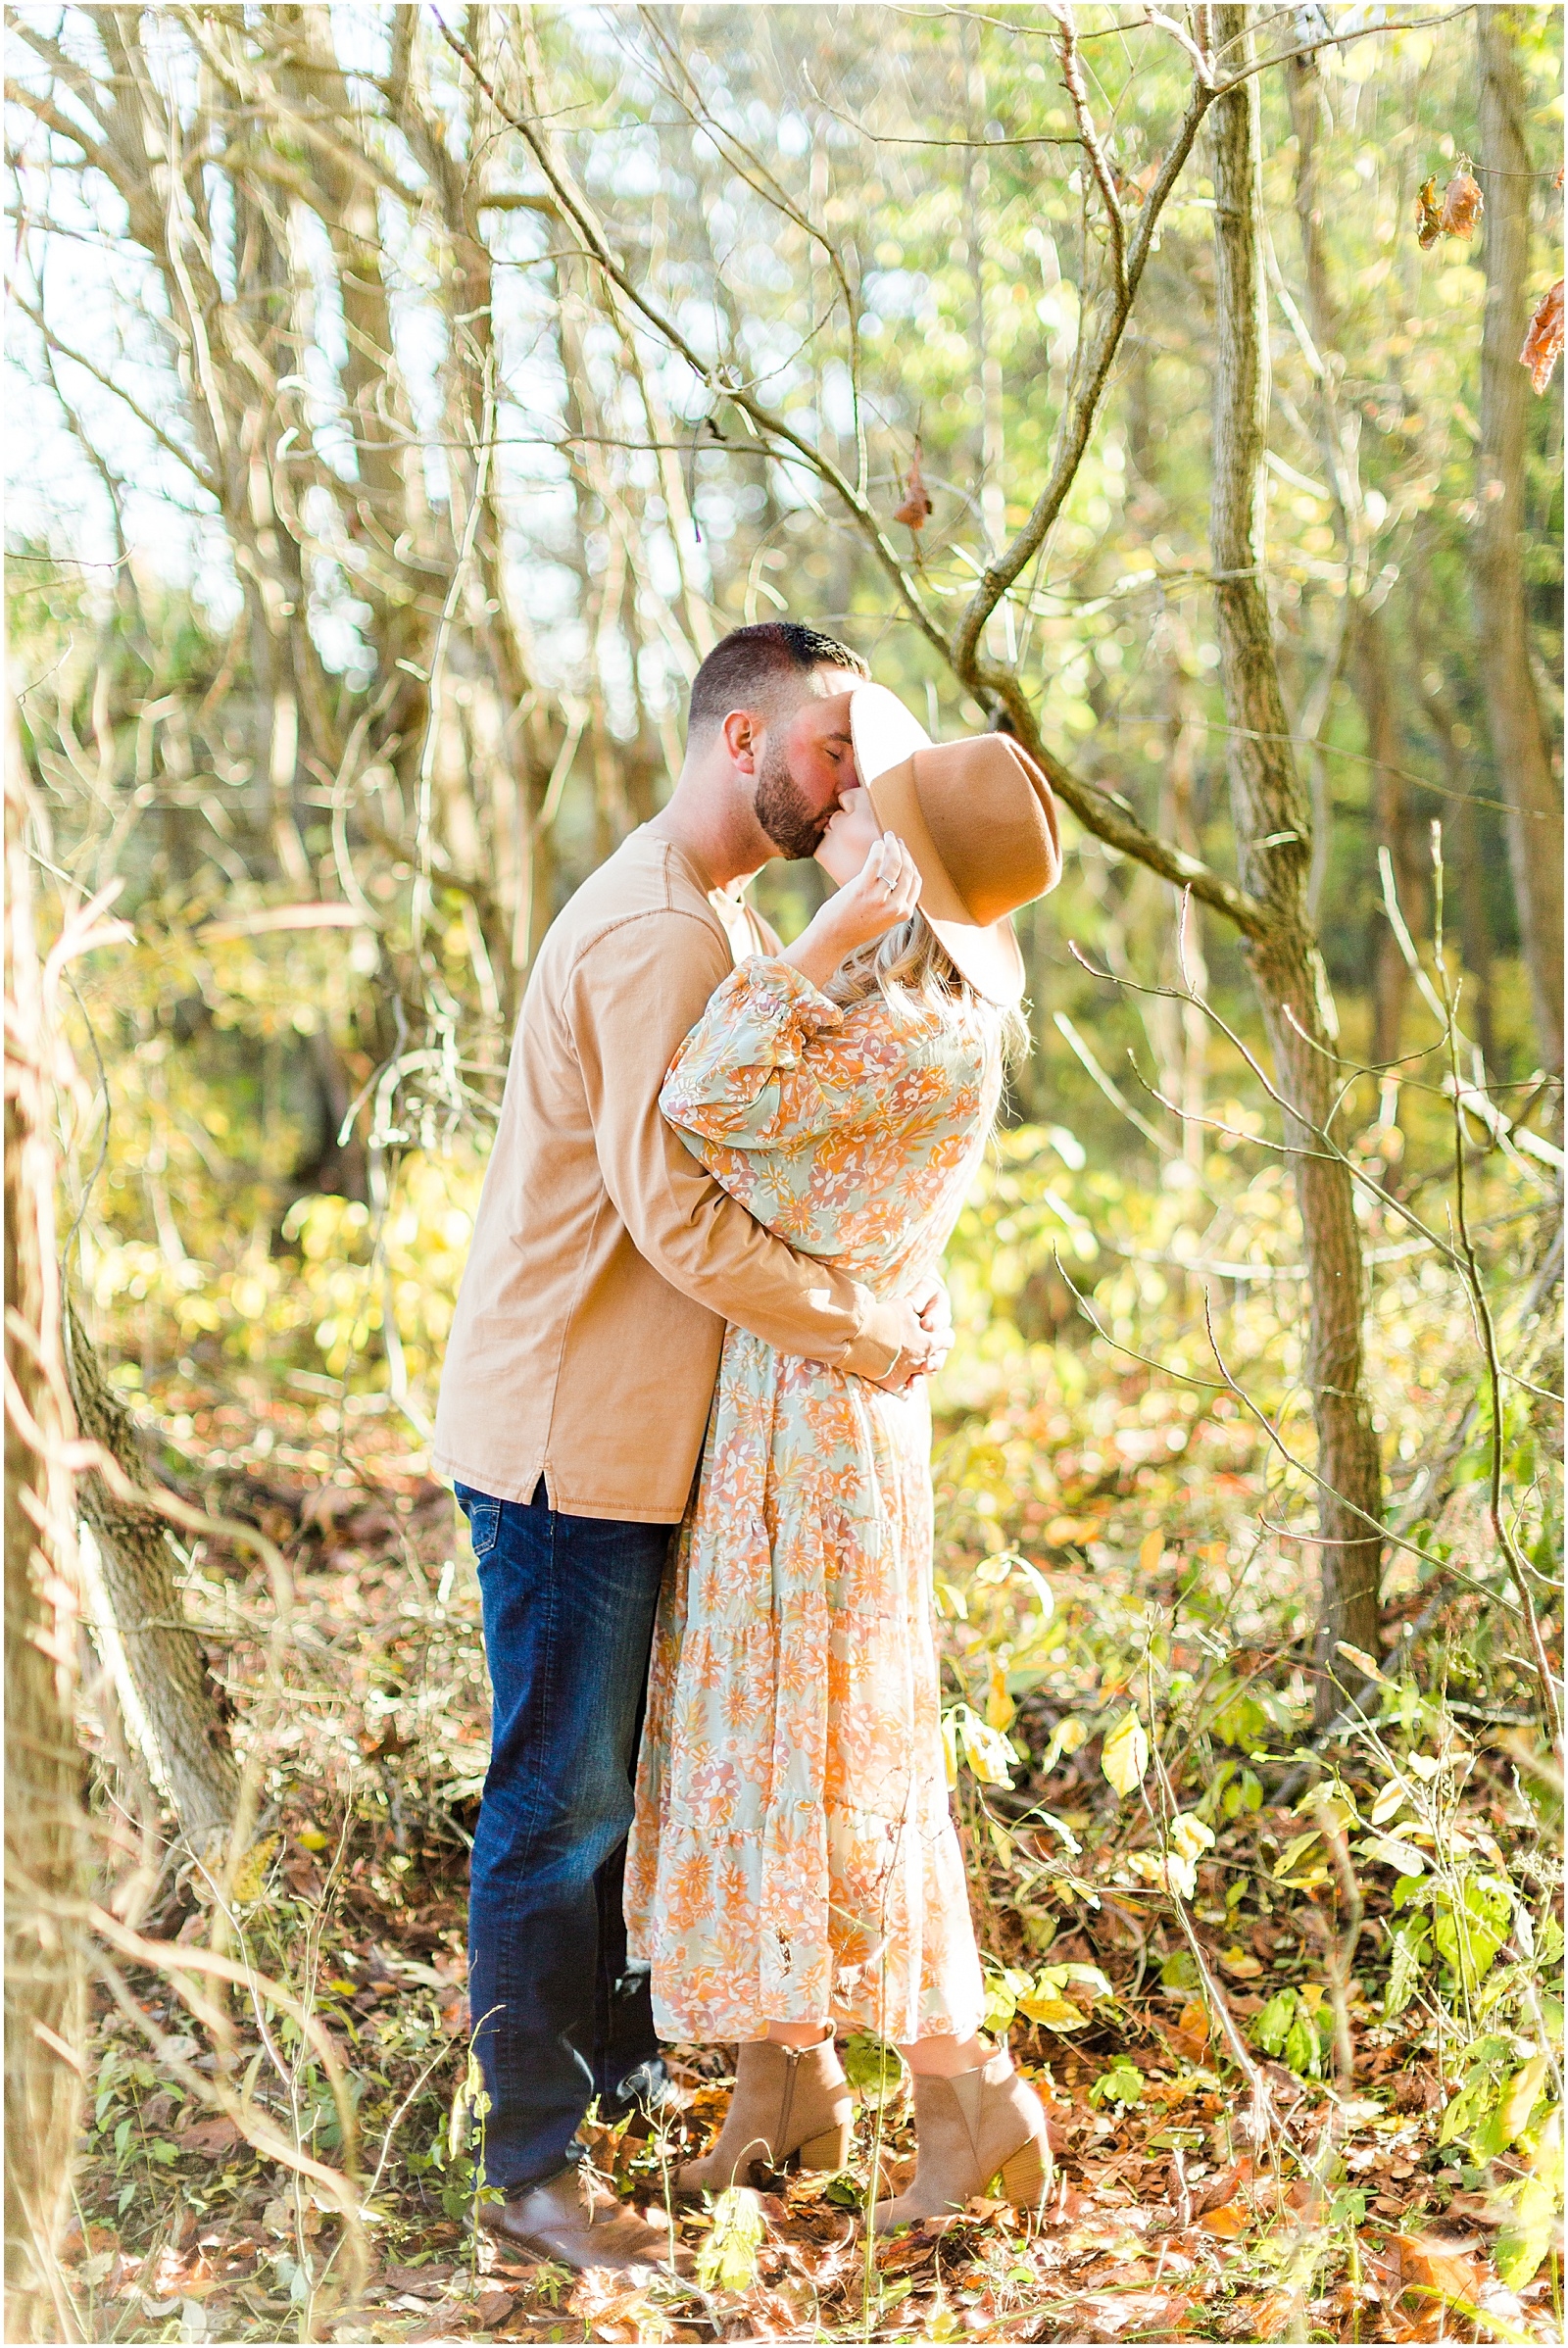 A Southern Indiana Engagement Session | Charleston and Erin | Bret and Brandie Photography012.jpg